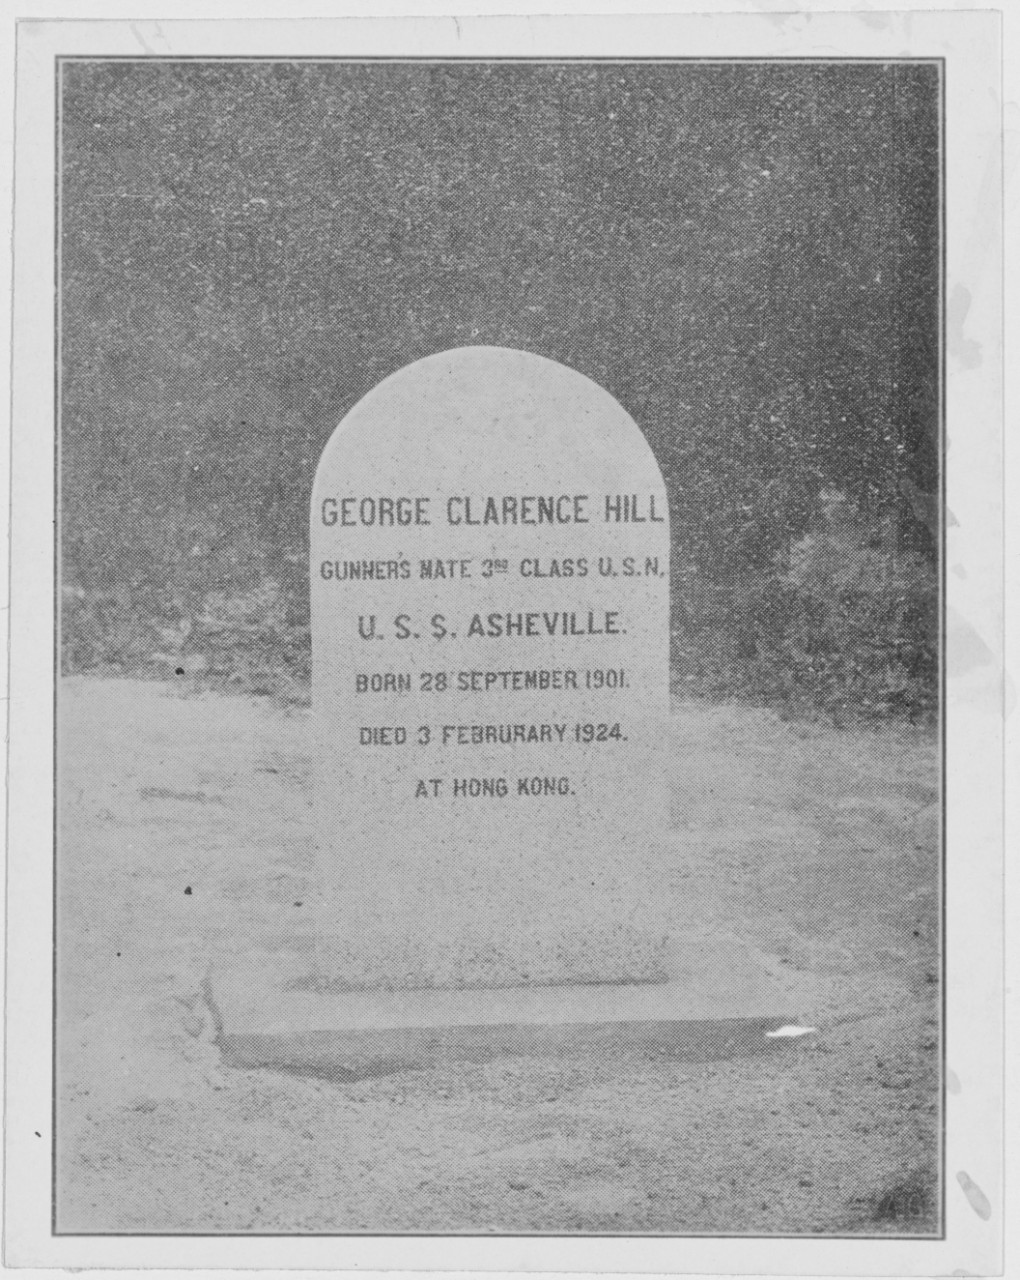 Grave stone of George Clarence Hill, Gunner's Mate 3rd Class, USN. U.S.S ASHEVILLE